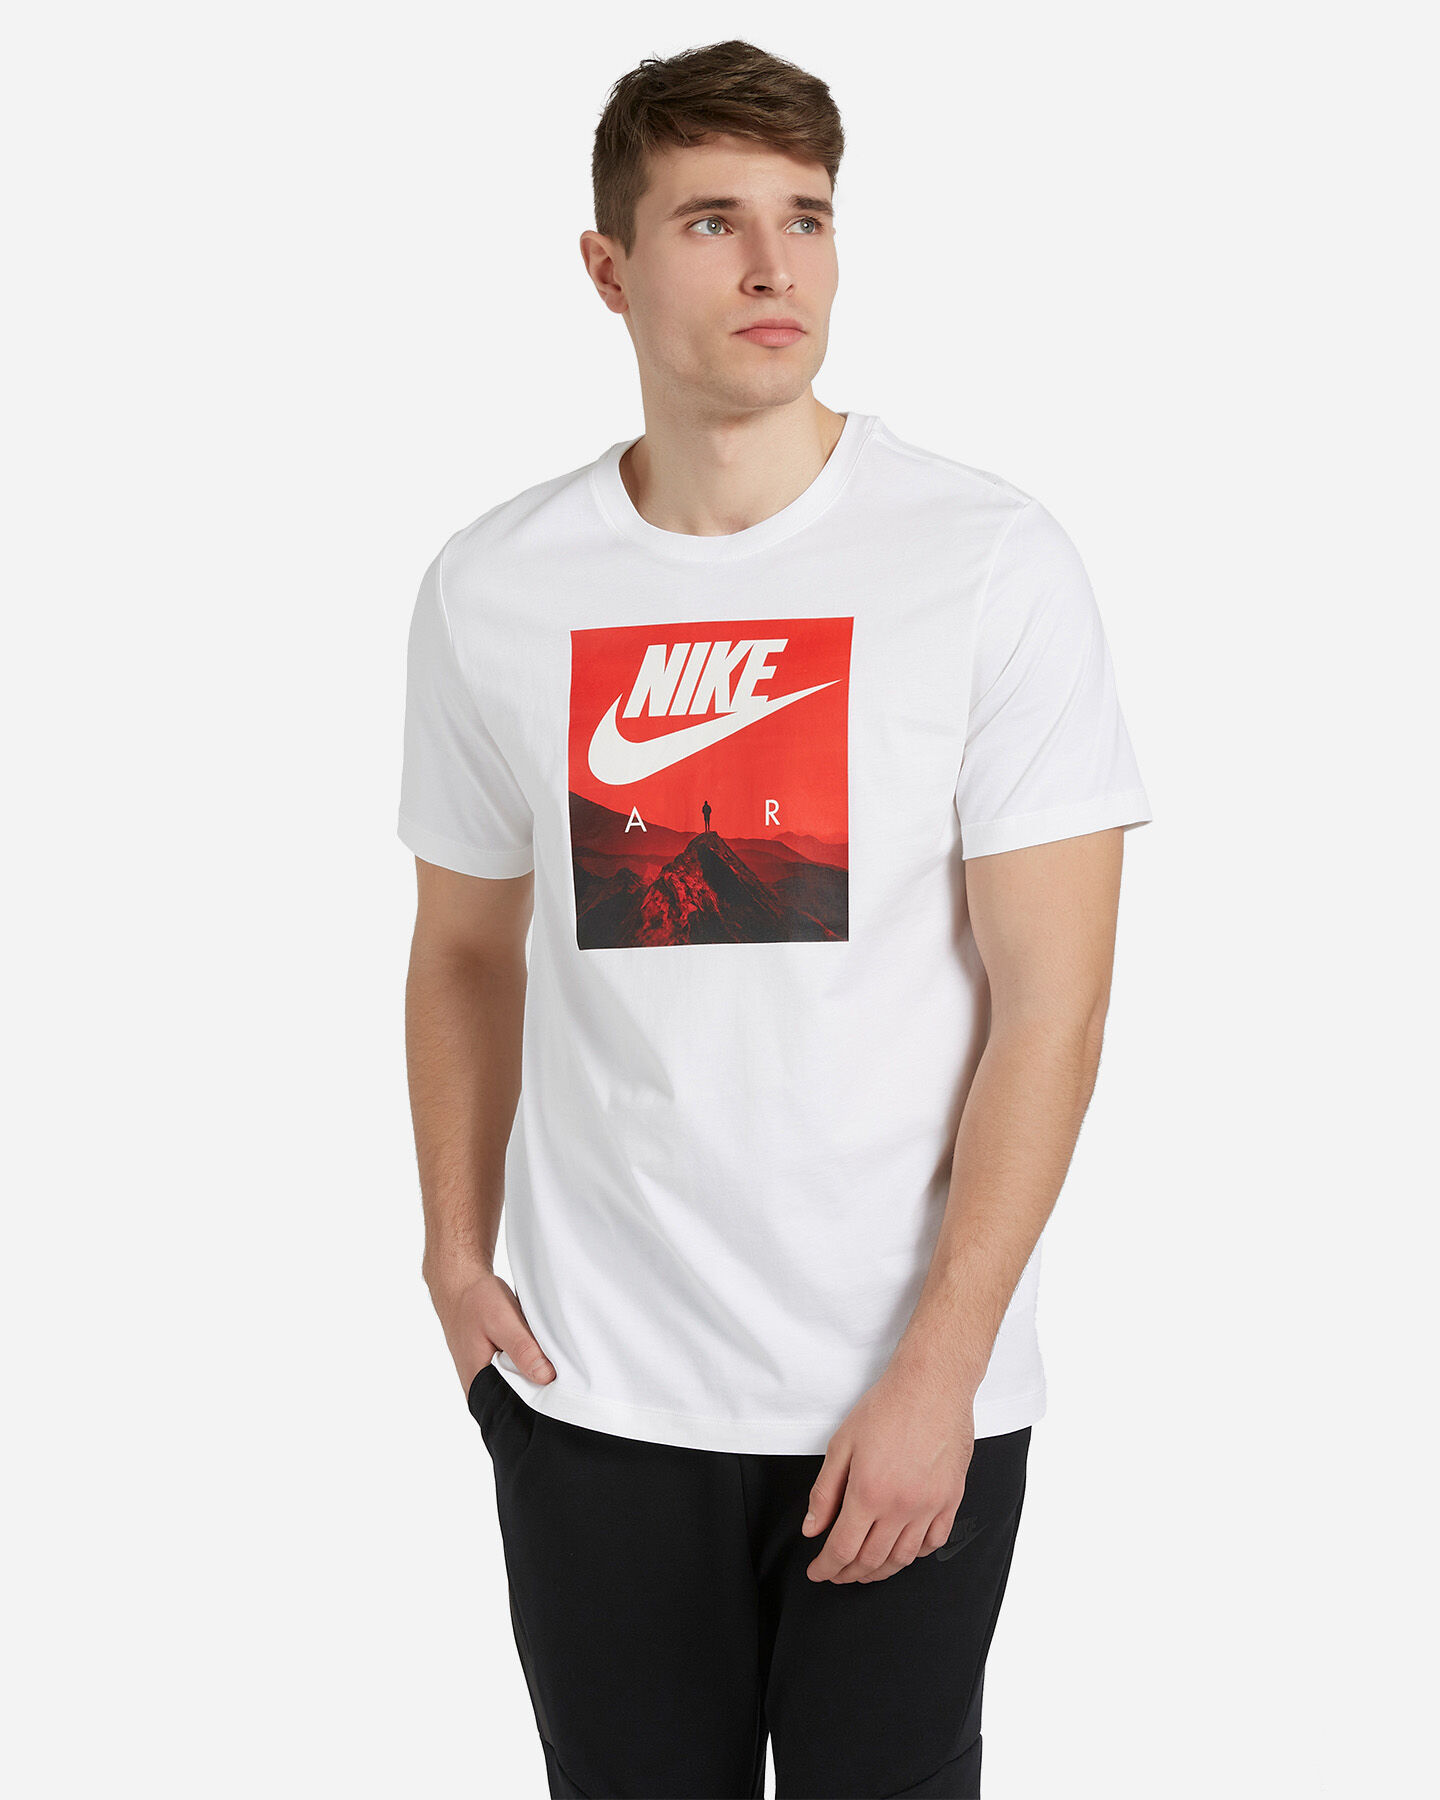  T-Shirt NIKE AIR PHOTO M S5164801|100|S scatto 0